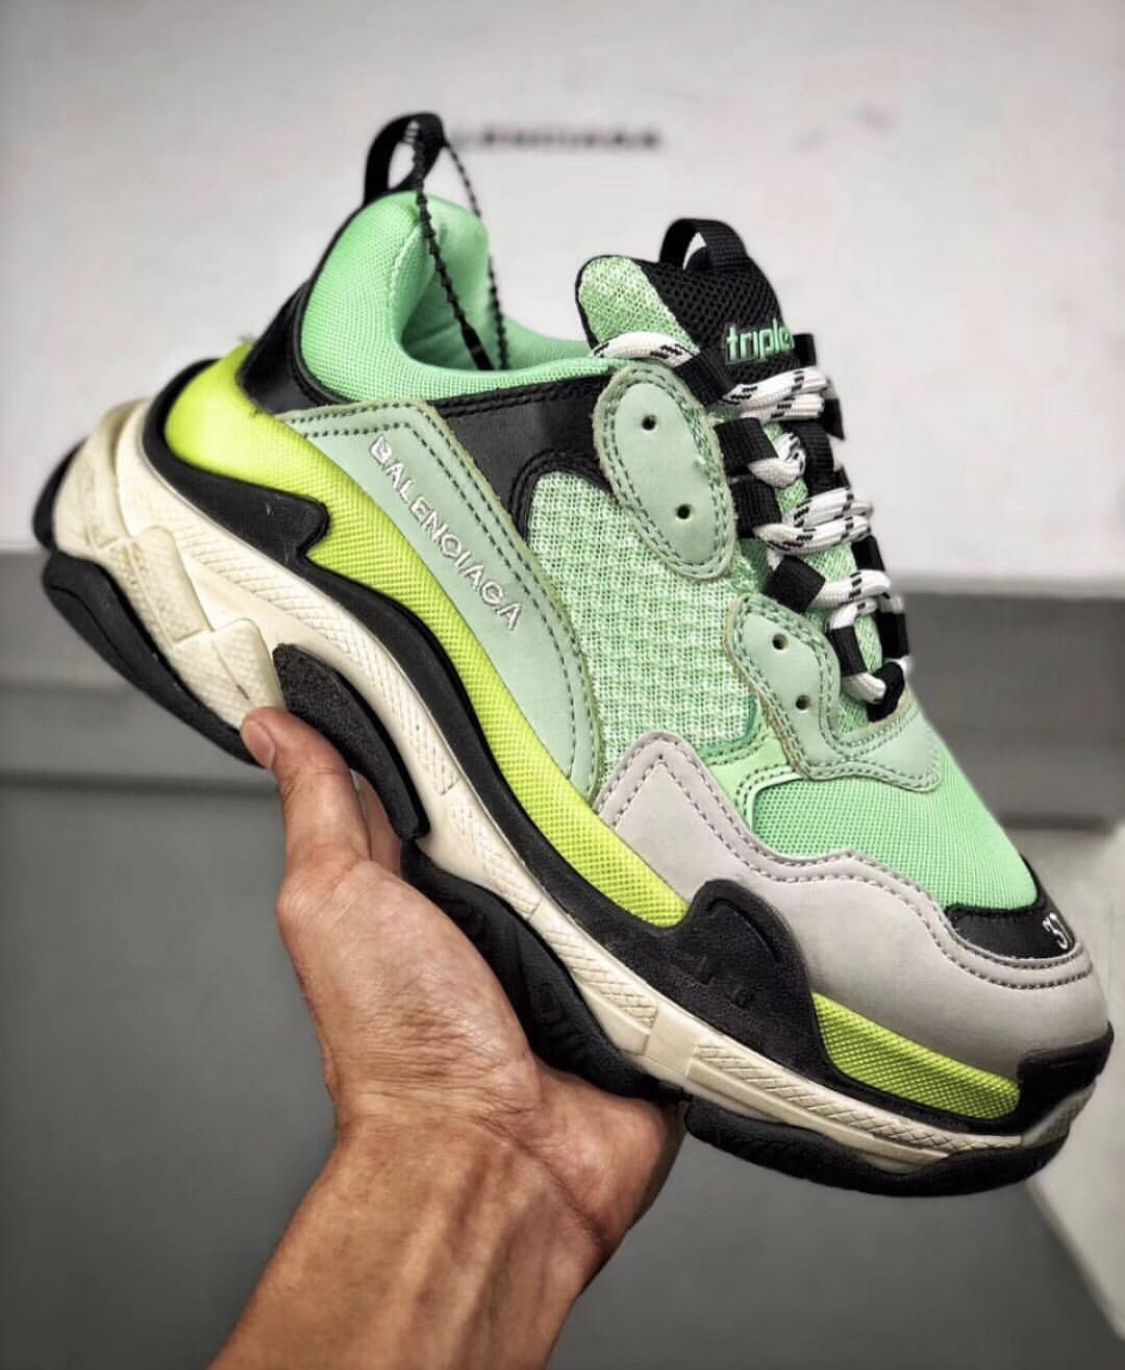 Now Available: Balenciaga Triple S SS19 Colorways — Sneaker Shouts